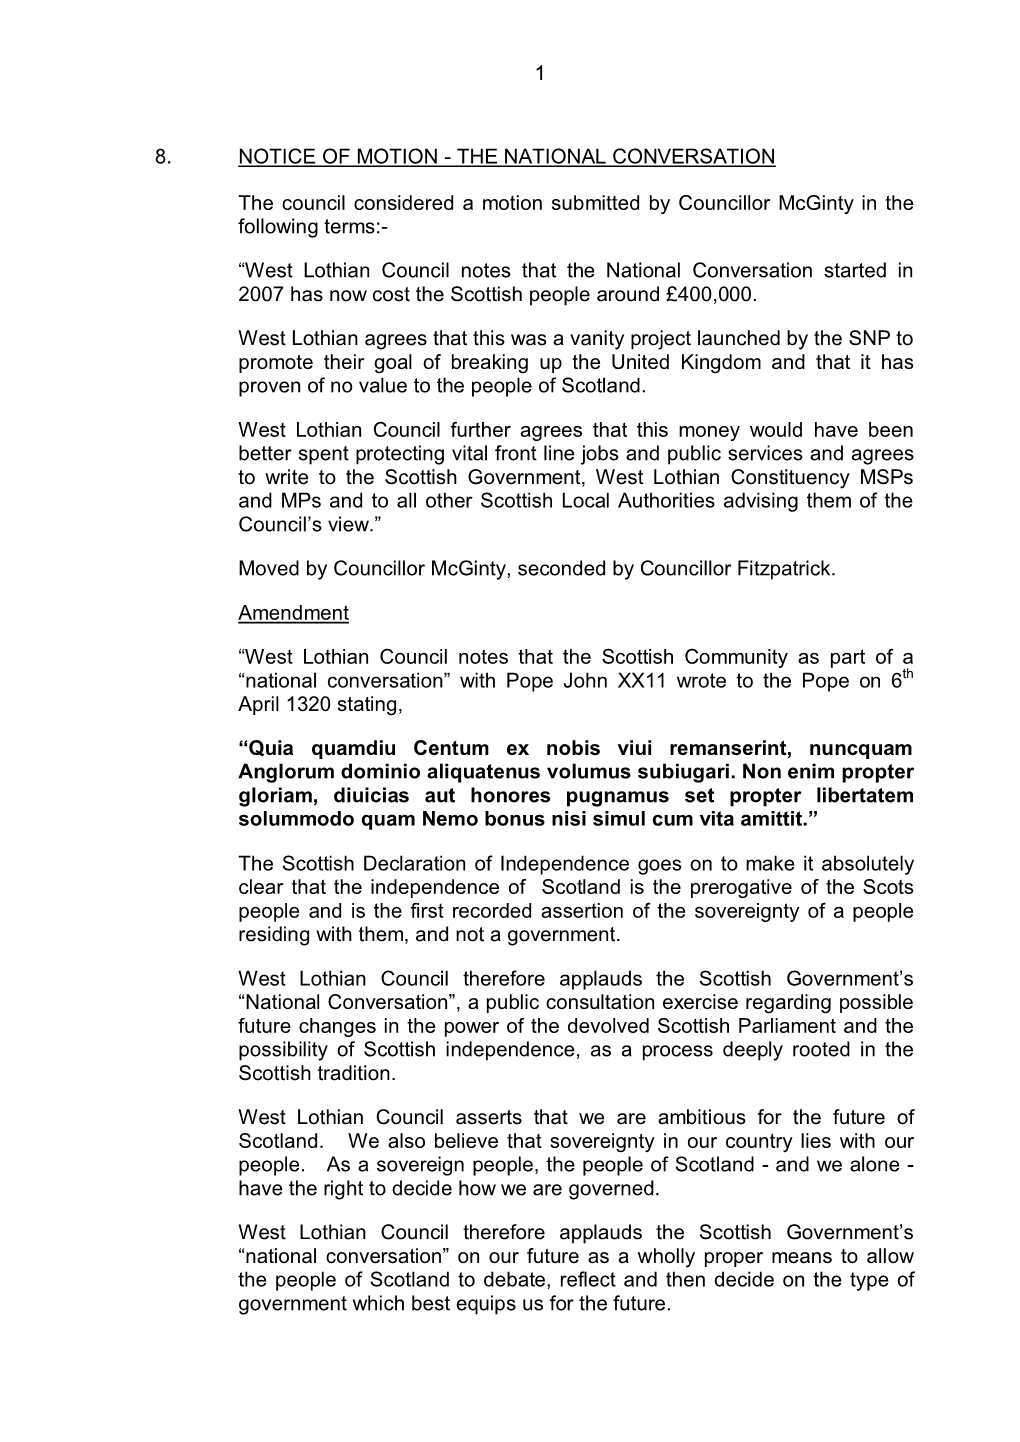 Notice of Motion - the National Conversation